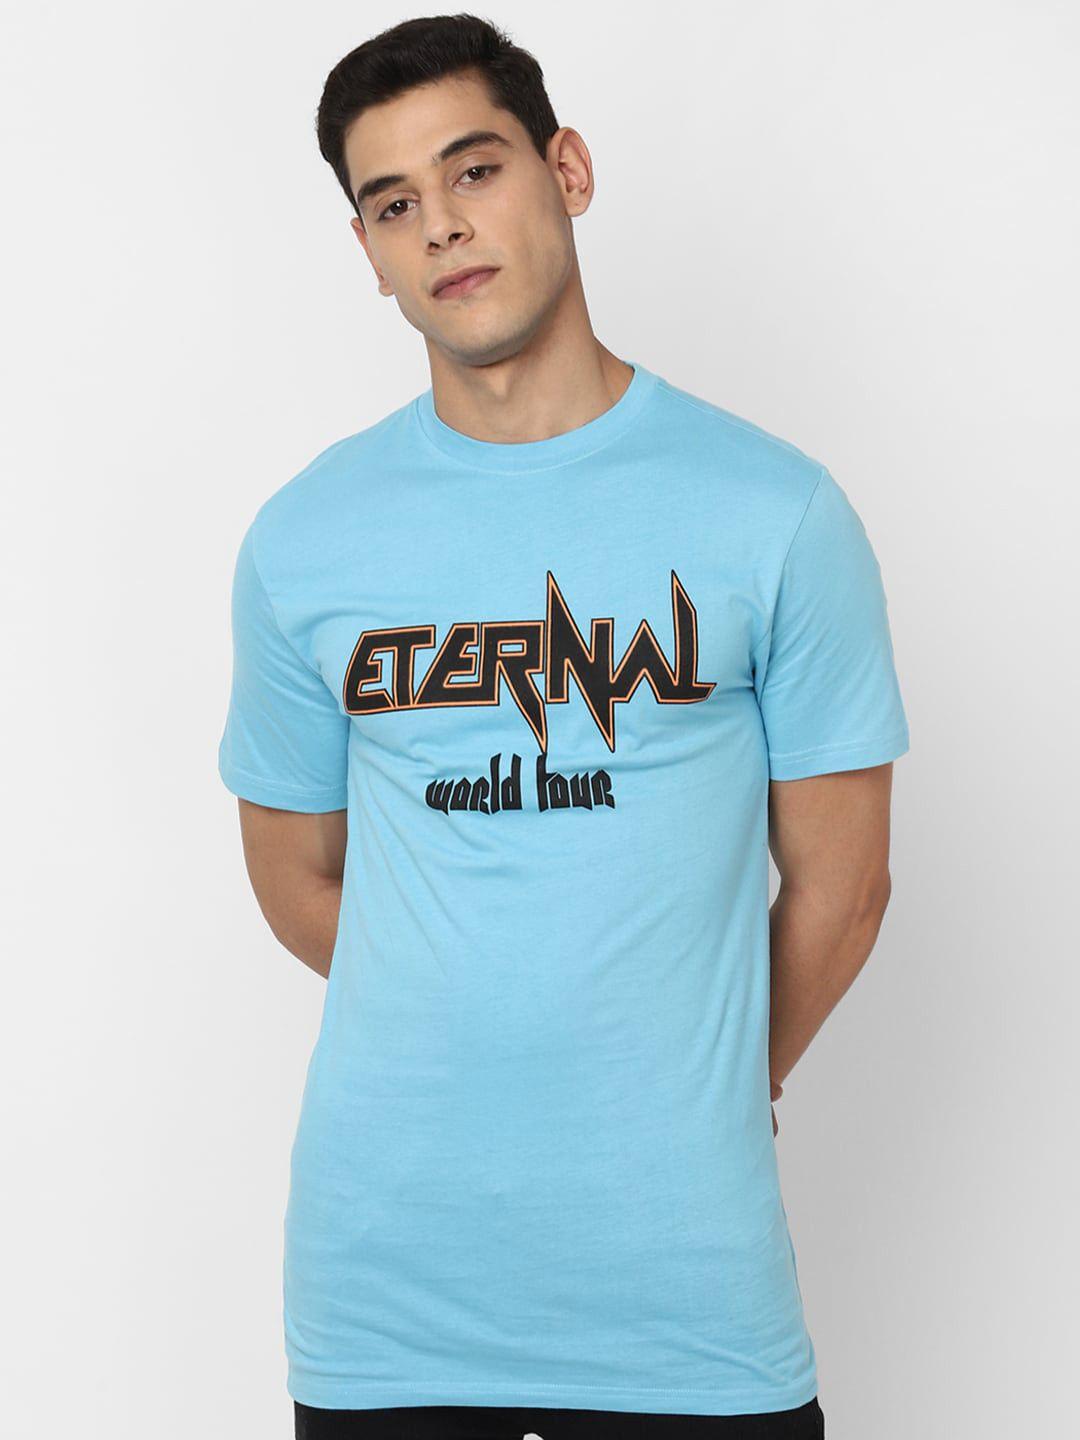 forever-21-men-blue-typography-printed-cotton-round-neck-pure-cotton-t-shirt